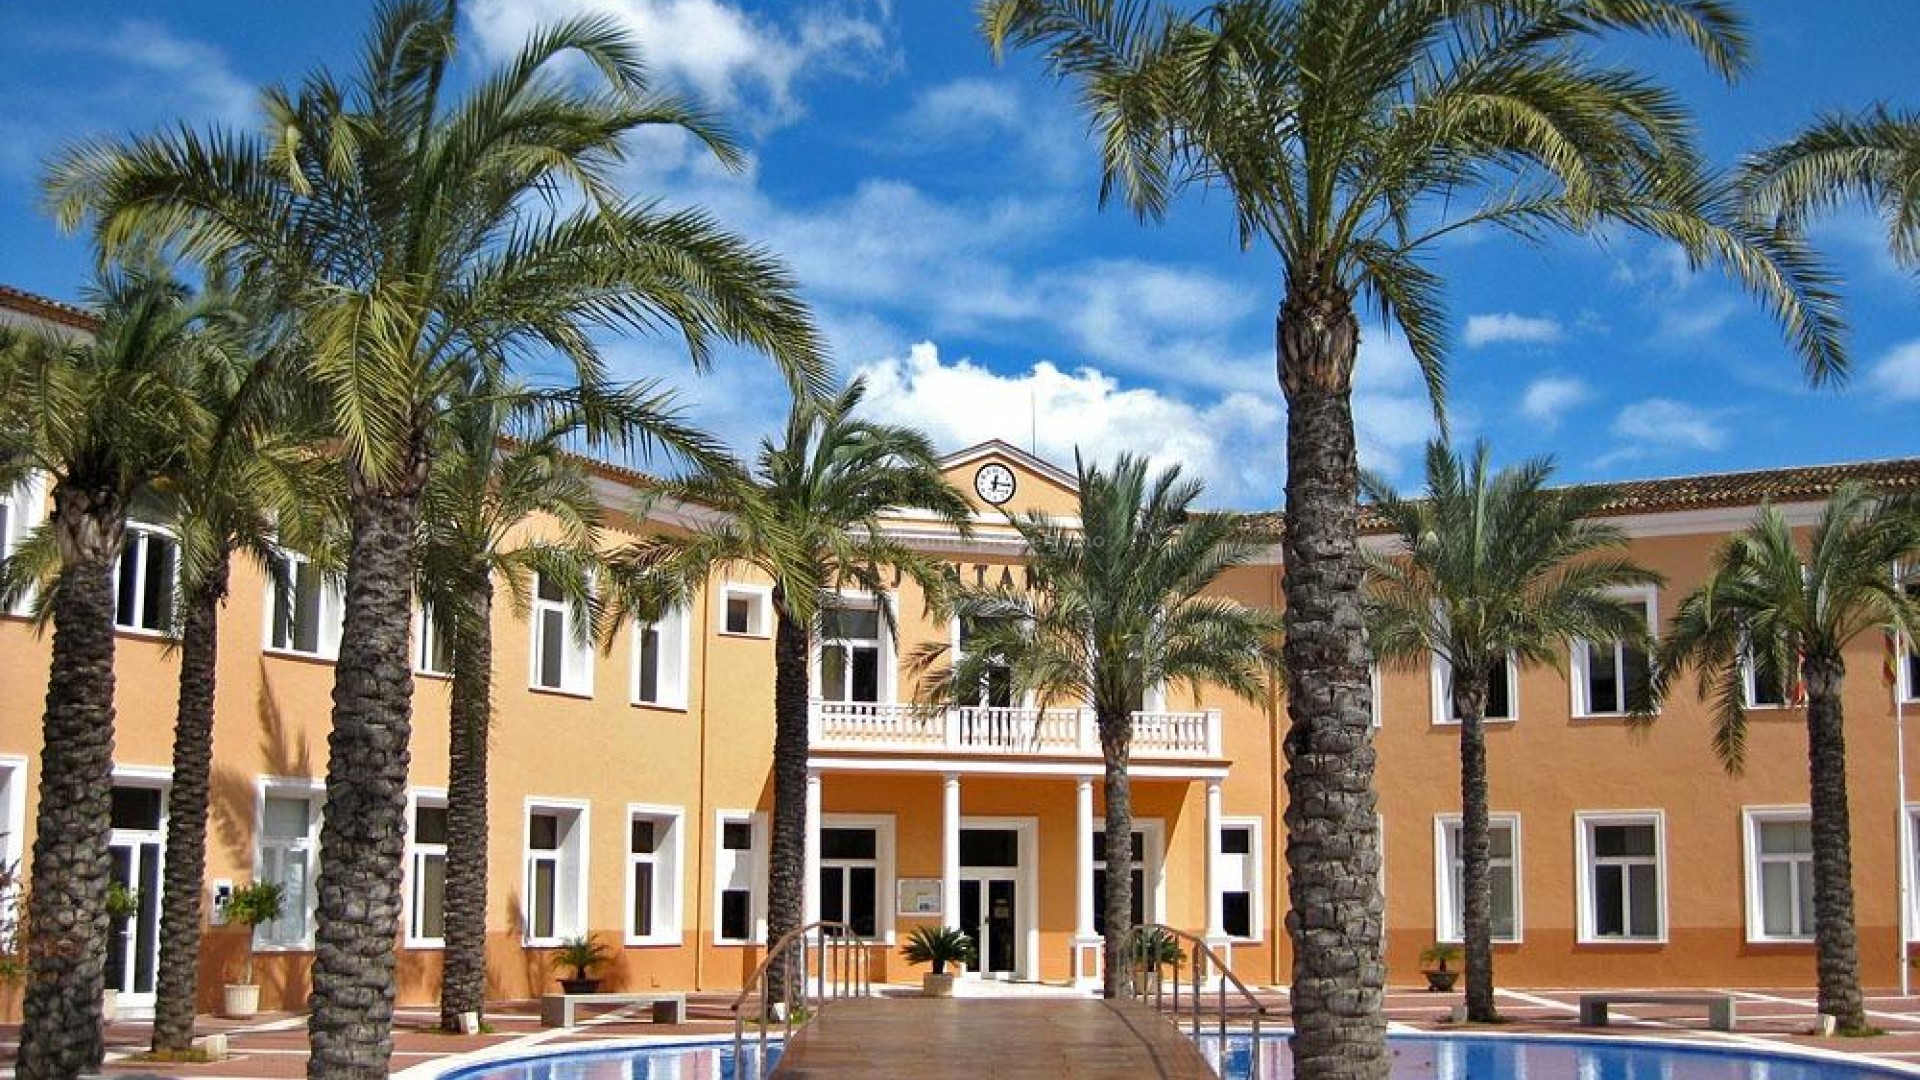 The residential complex with luxury apartments and penthouses in El Verger in Denia, 3 bedrooms, 3 bathrooms, spacious terraces and several swimming pools, great views